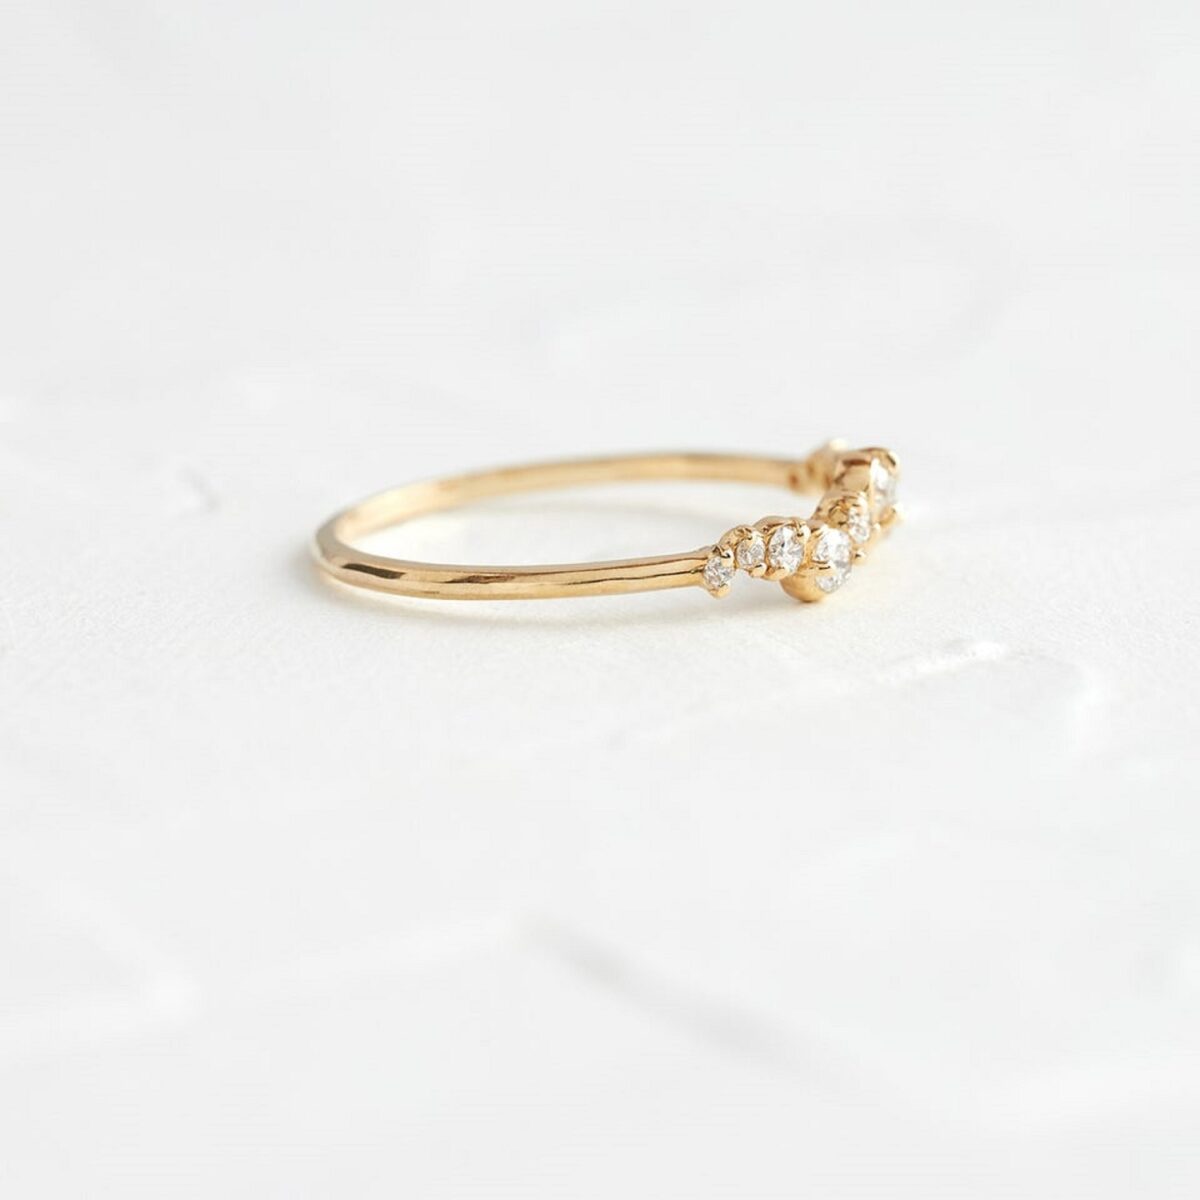 Tiara shape round cut lab grown diamond stackable matching band crafted in 14k yellow gold.